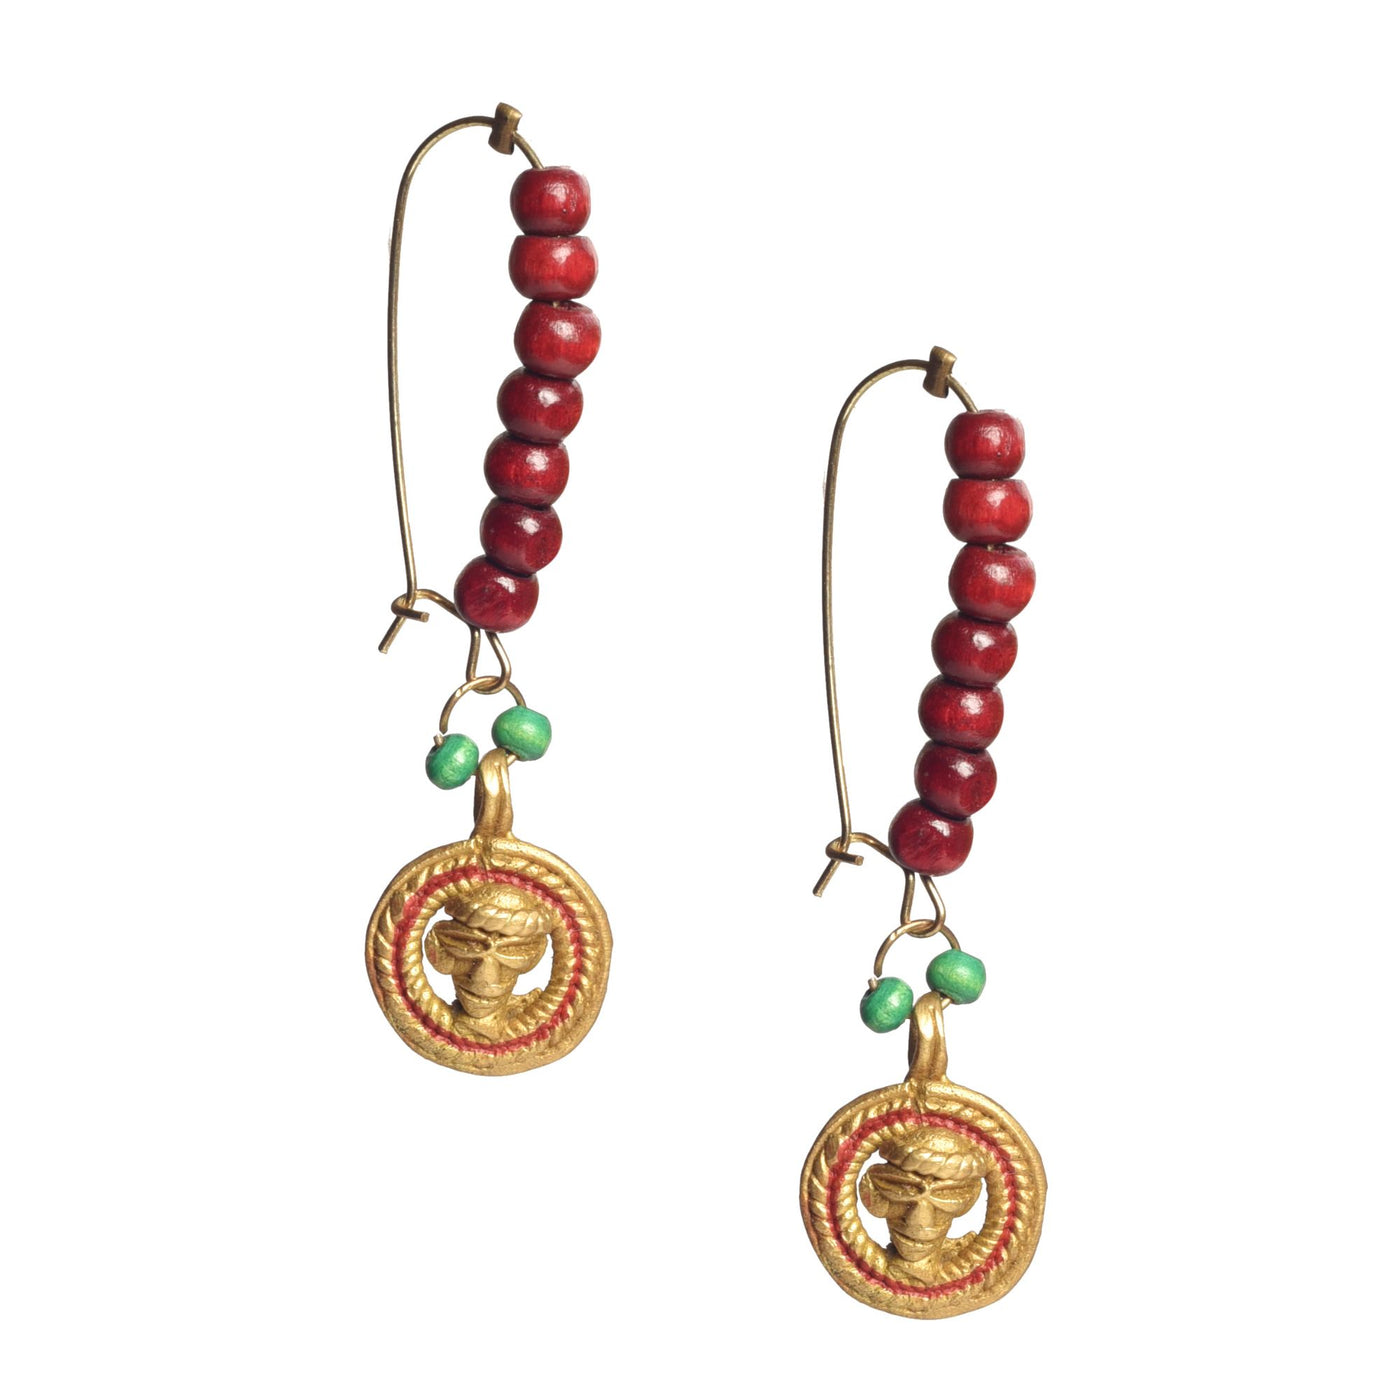 Queens Glory Handcrafted Tribal Earrings - Fashion & Lifestyle - 2